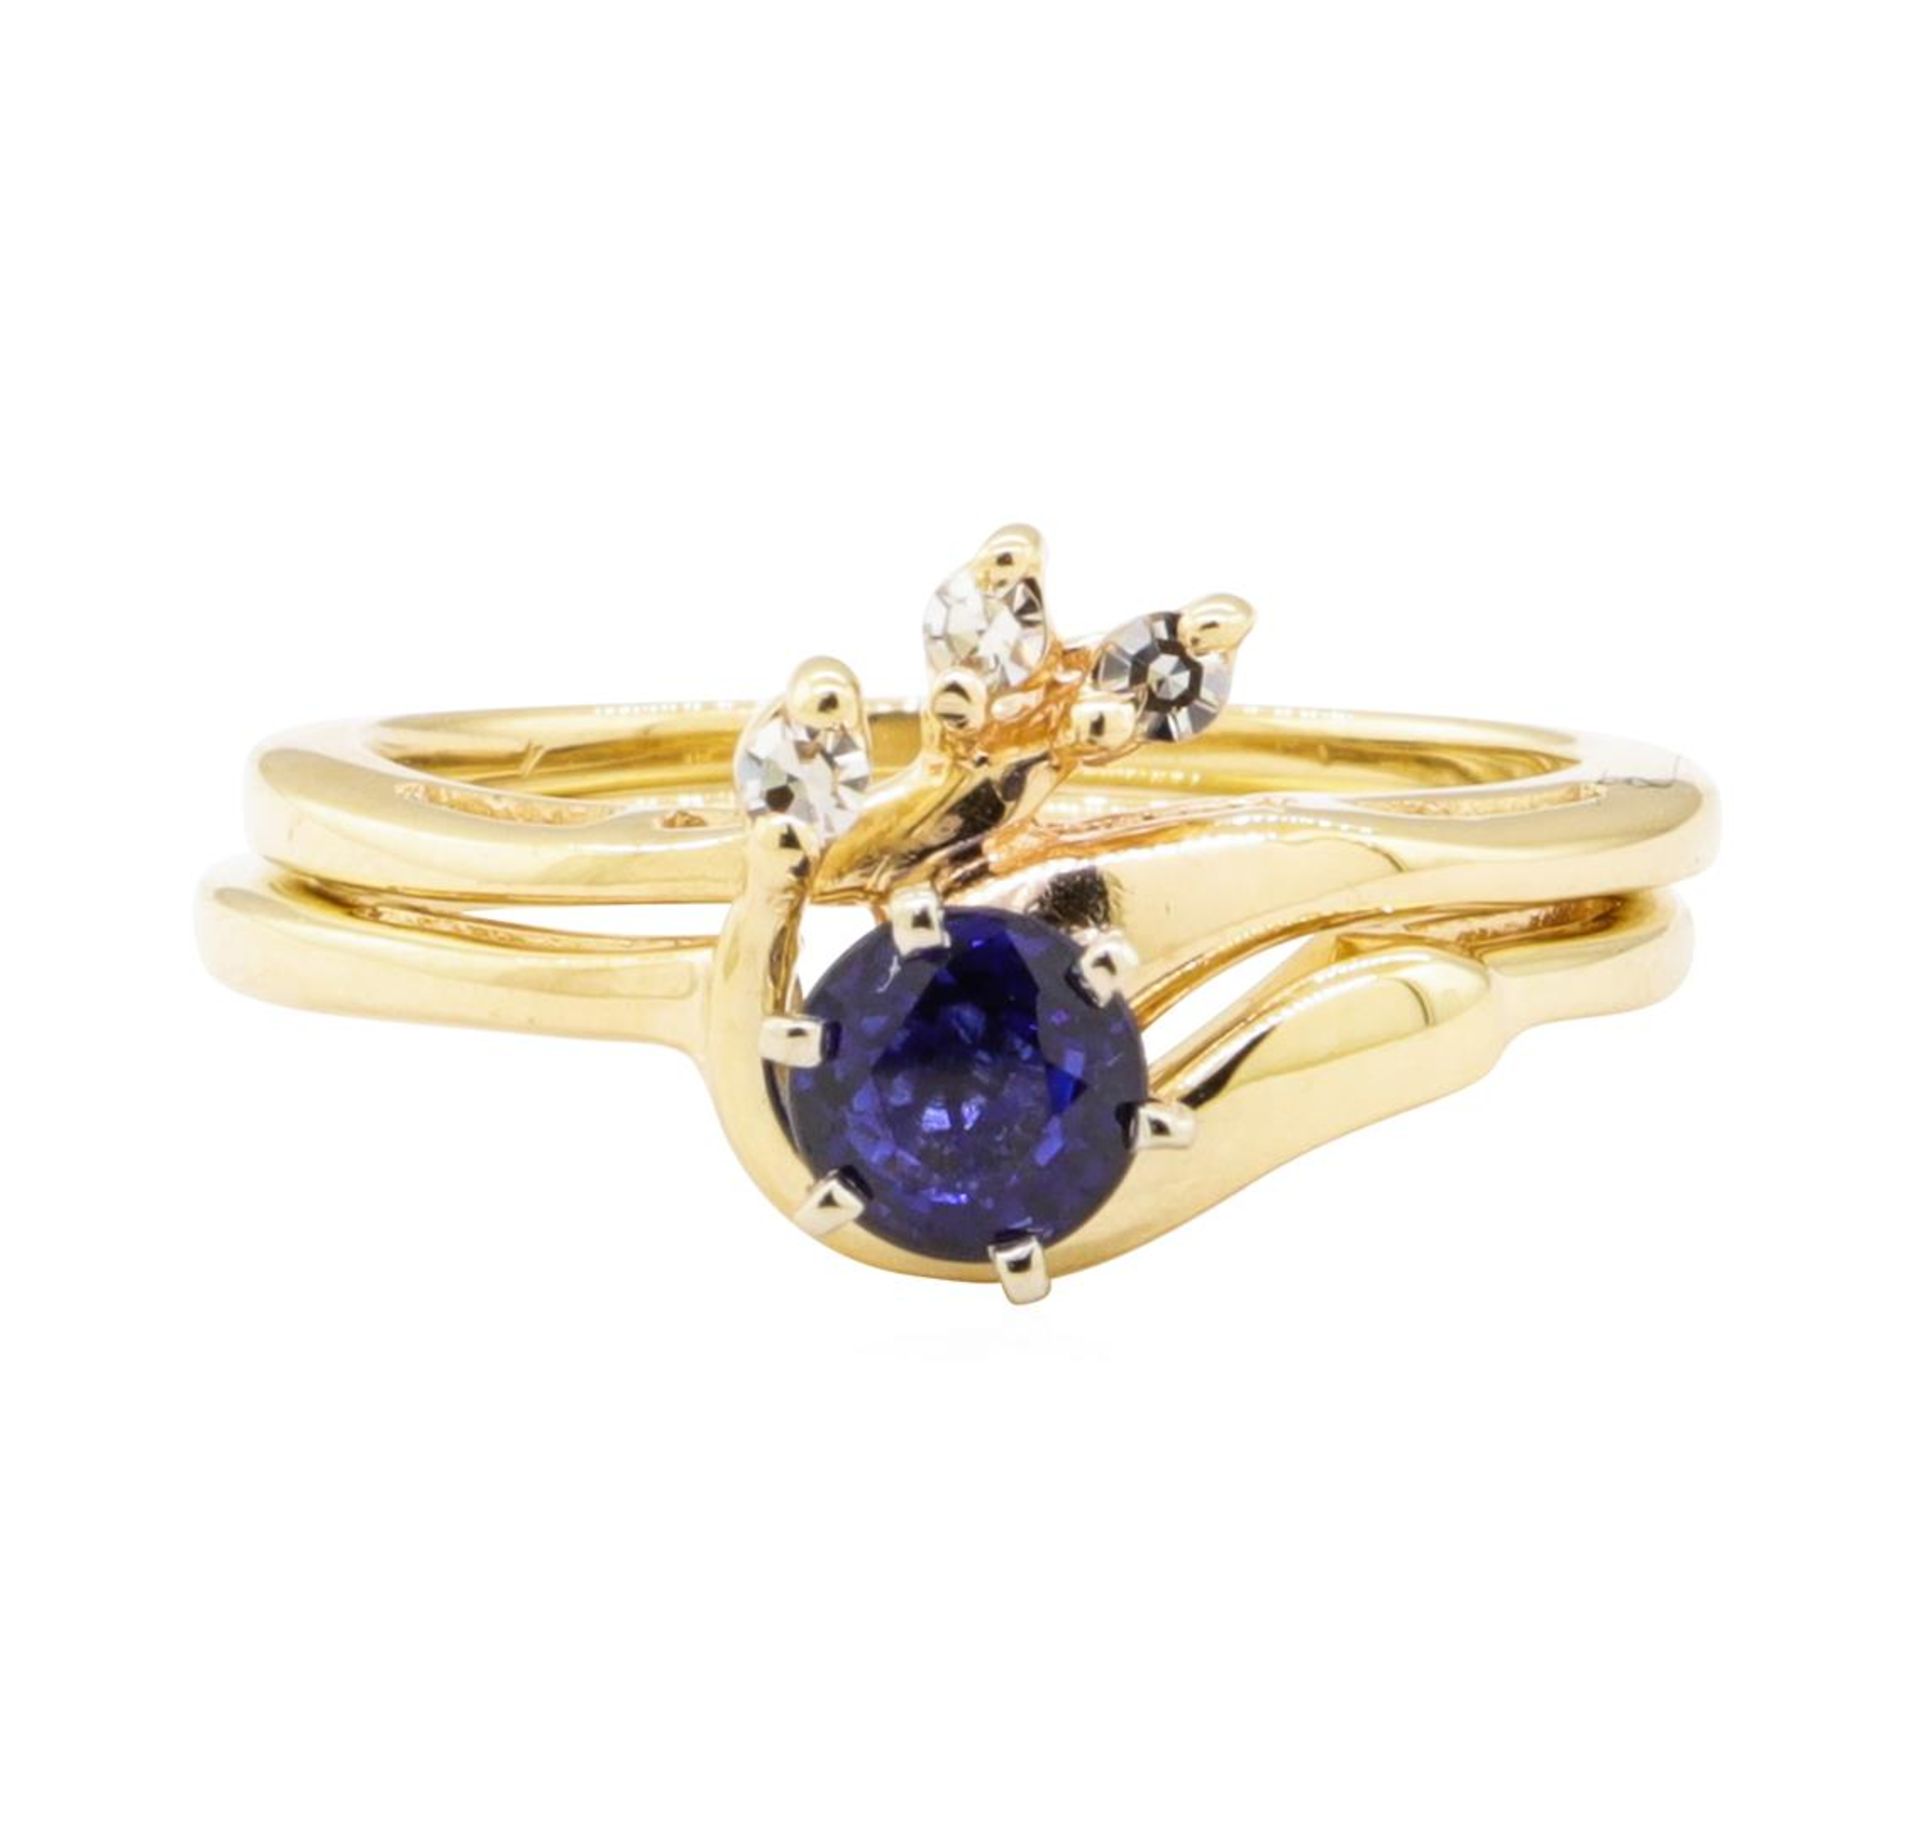 0.67 ctw Blue Sapphire and Diamond Ring - 14KT Yellow Gold - Image 2 of 3